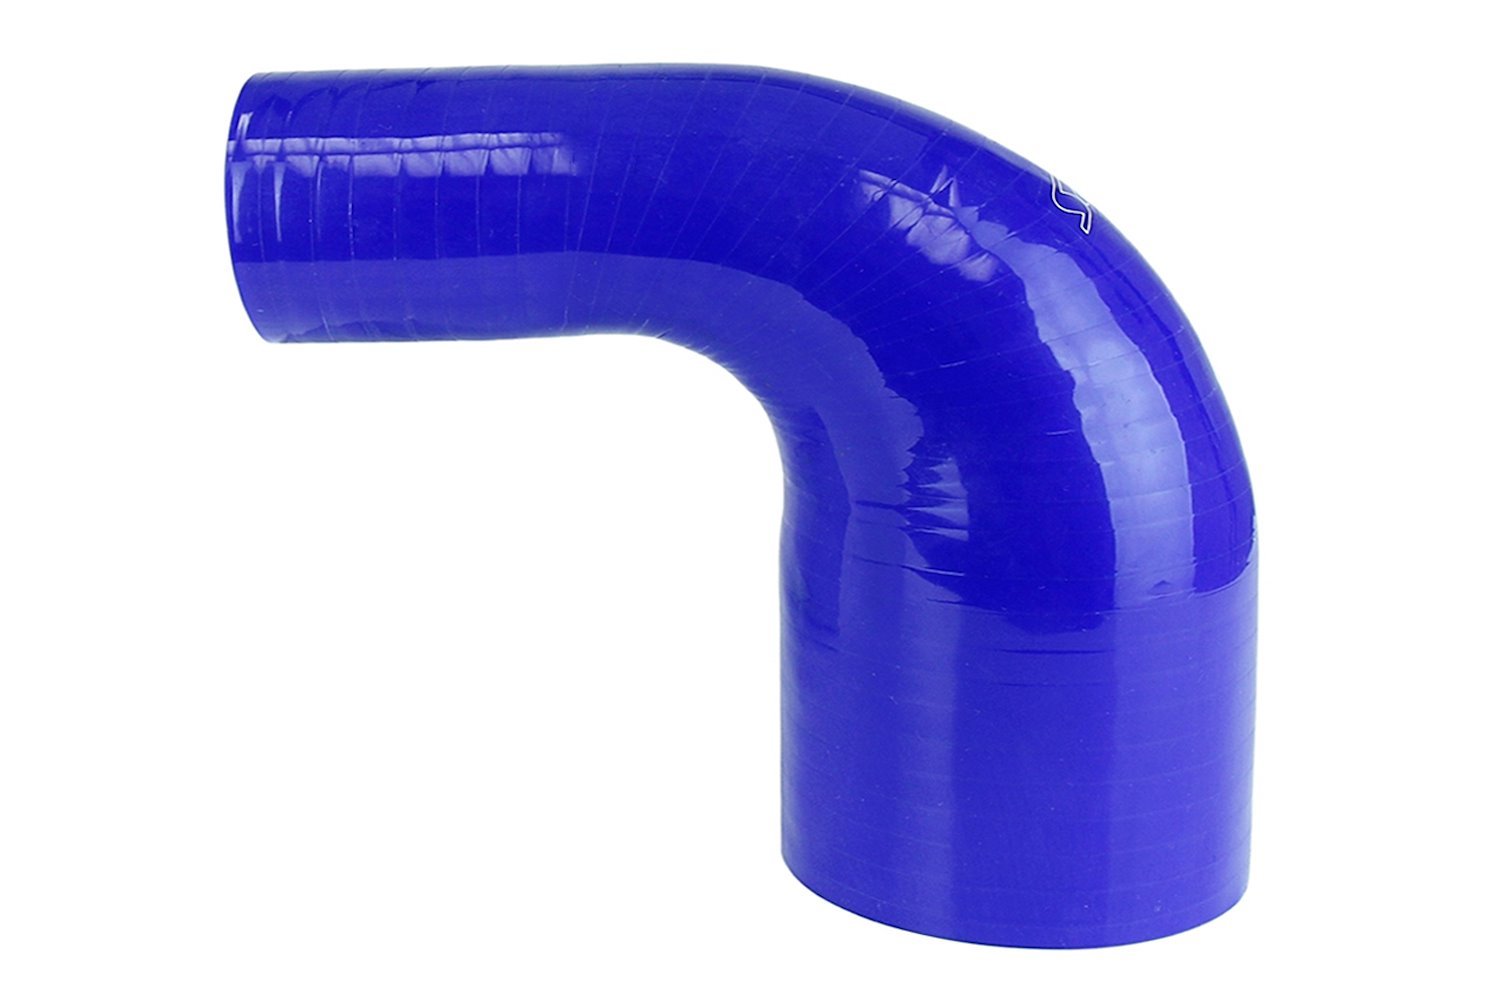 HTSER90-325-350-BLUE Silicone 90-Degree Elbow Hose, High-Temp 4-Ply Reinforced, 3-1/4 in. - 3-1/2 in. ID, Blue